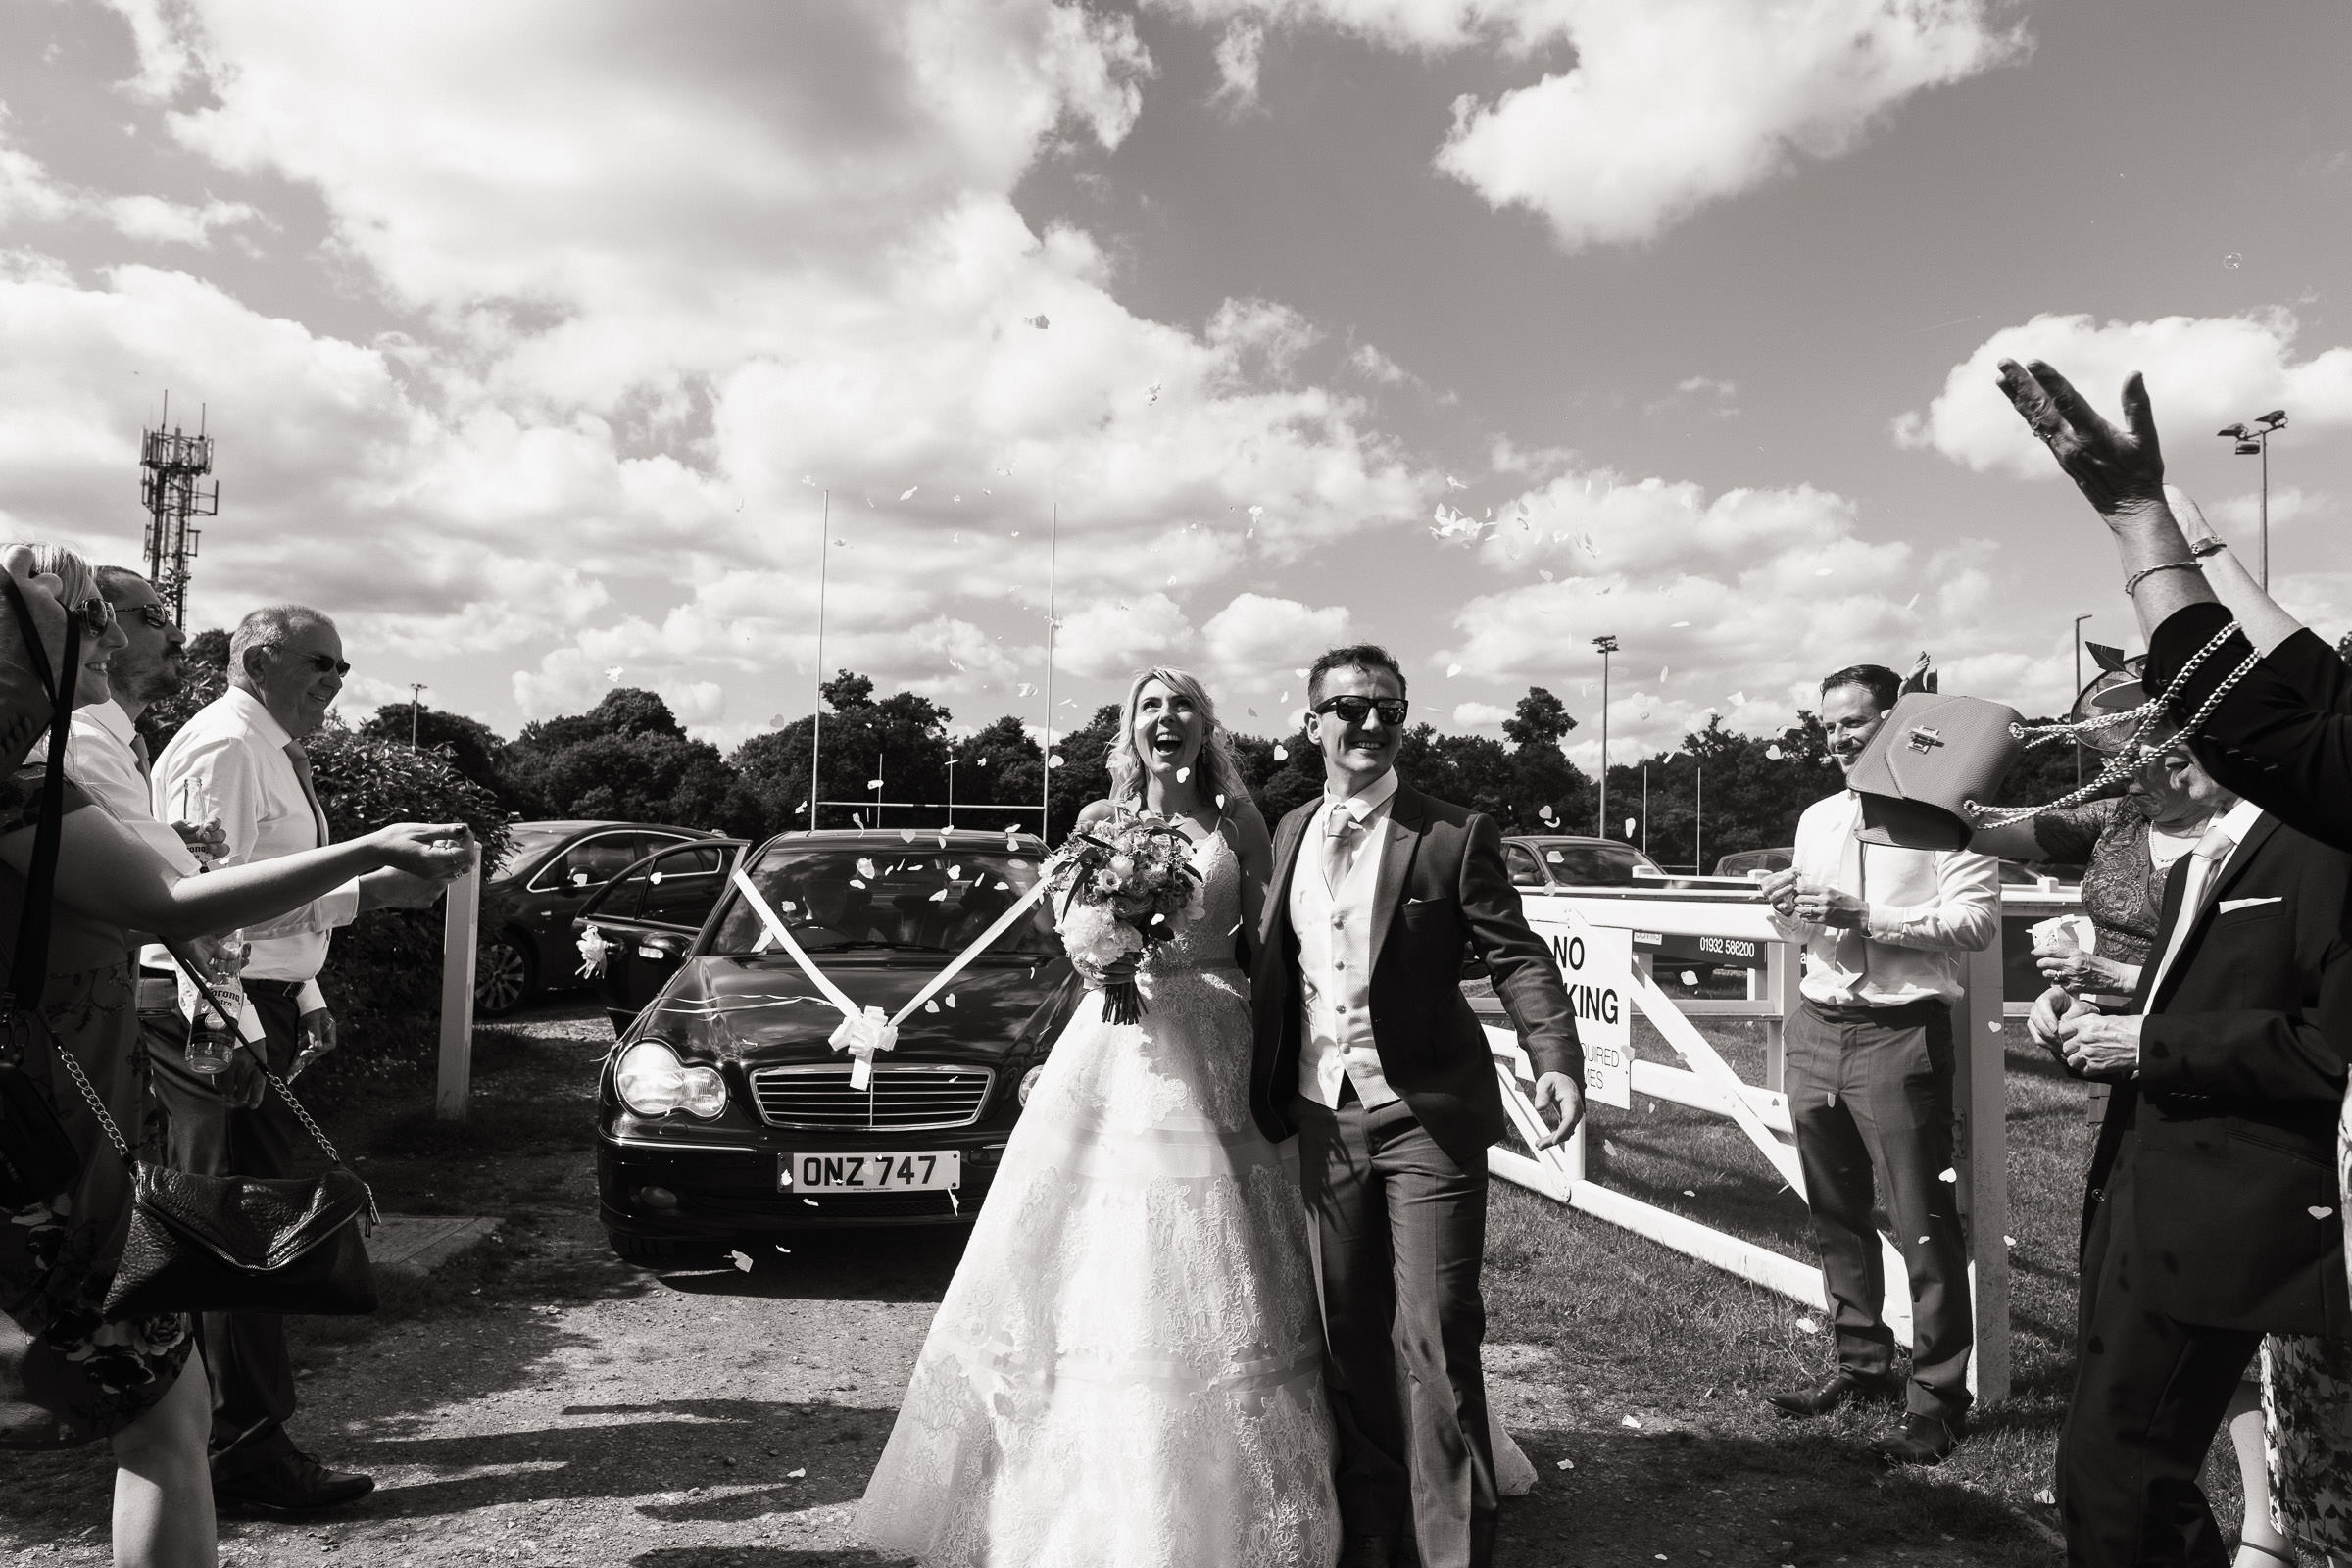 Newly married couple arriving at The Cobham Curve for their wedding reception. Their guests throwing confetti over them as they walk past. It's a sunny day with blue skies. Woman wears Allure Bridals ball gown 9400.